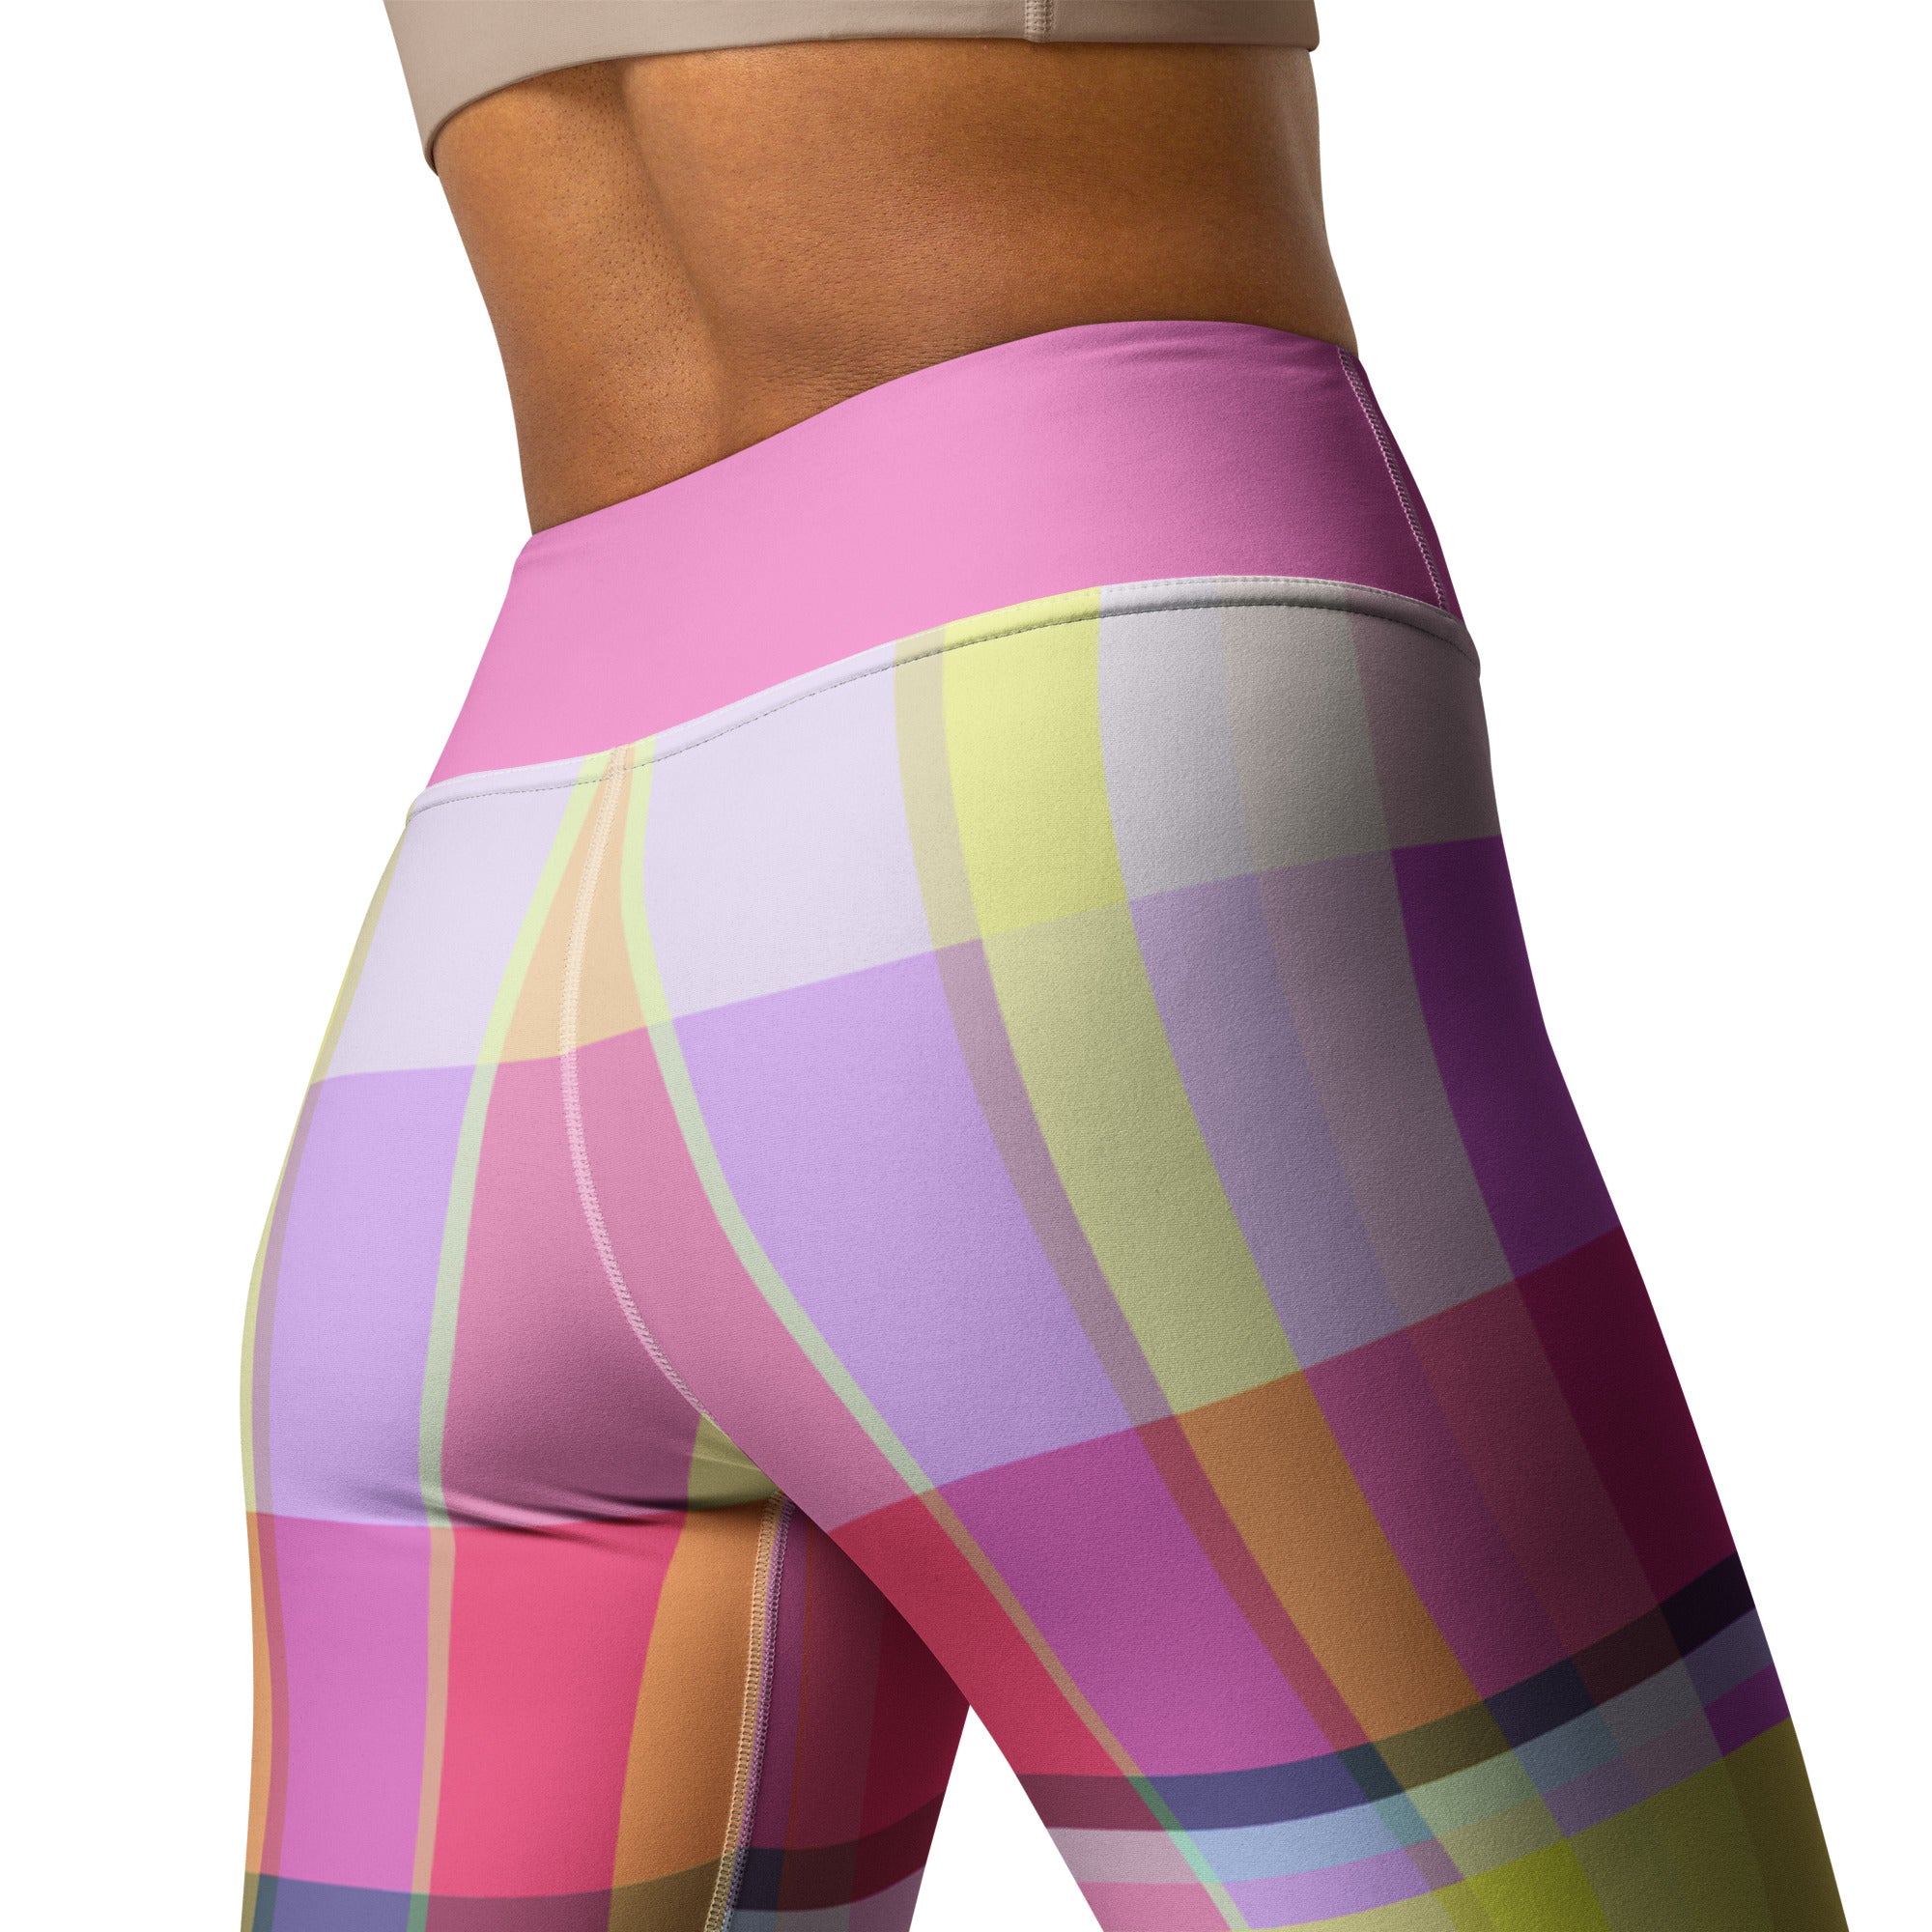 Bright and cheerful yoga leggings with a rainbow spectrum pattern, inspiring positivity and energy in your practice.